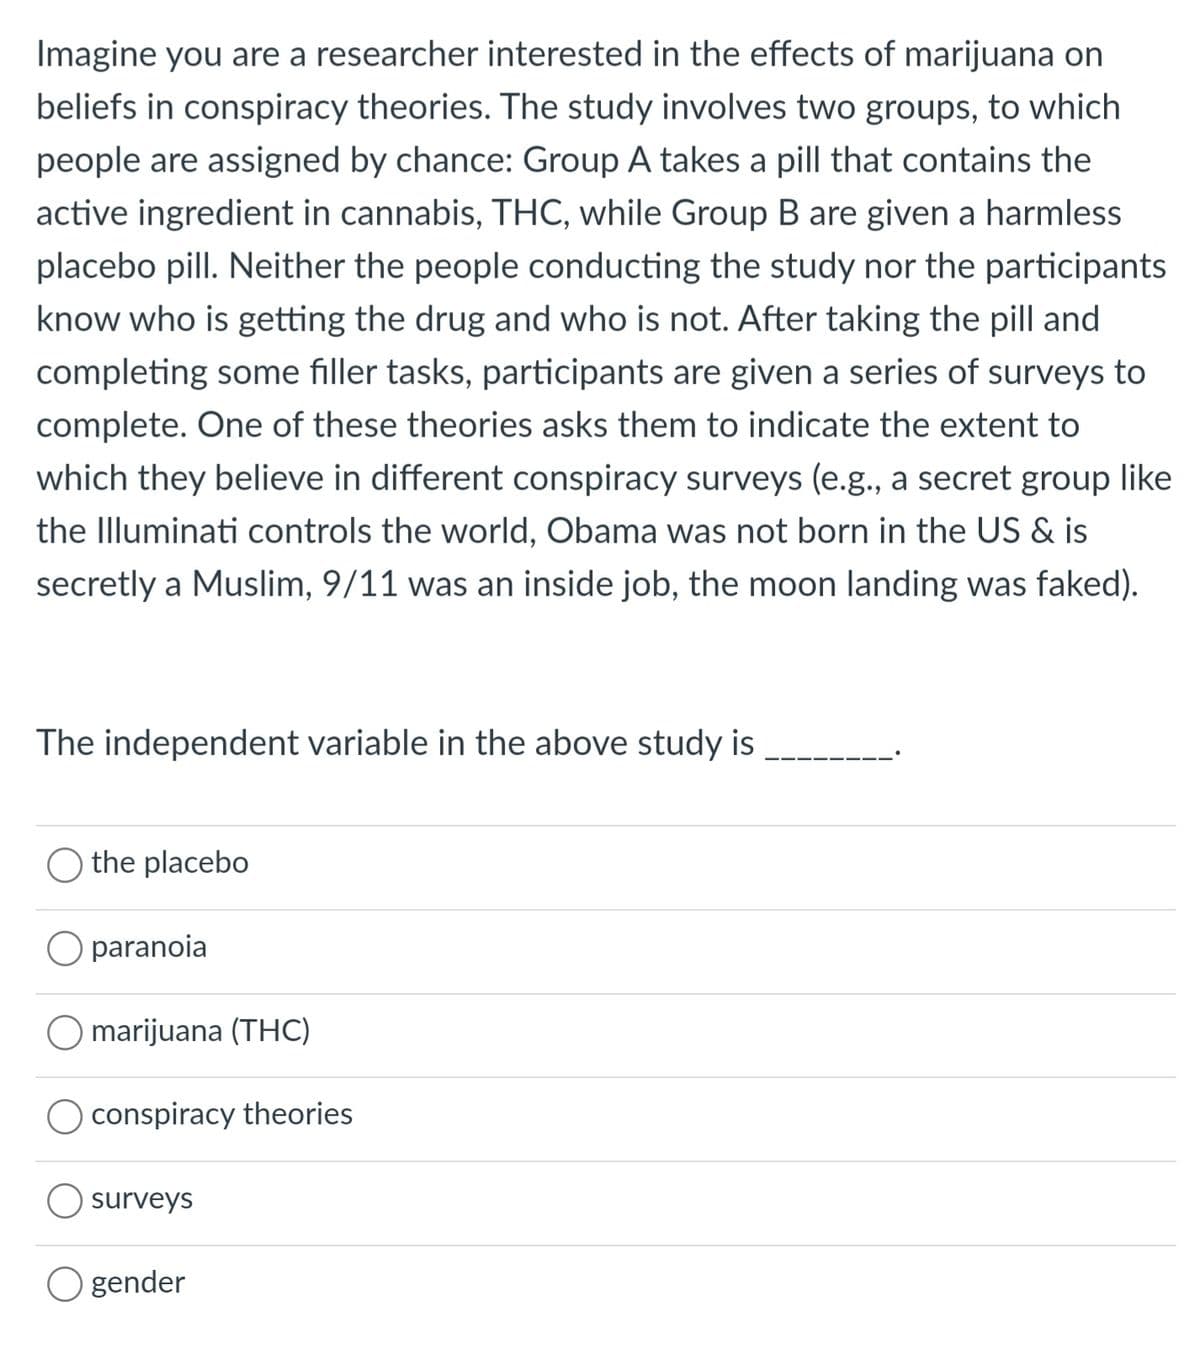 Imagine you are a researcher interested in the effects of marijuana on
beliefs in conspiracy theories. The study involves two groups, to which
people are assigned by chance: Group A takes a pill that contains the
active ingredient in cannabis, THC, while Group B are given a harmless
placebo pill. Neither the people conducting the study nor the participants
know who is getting the drug and who is not. After taking the pill and
completing some filler tasks, participants are given a series of surveys to
complete. One of these theories asks them to indicate the extent to
which they believe in different conspiracy surveys (e.g., a secret group like
the Illuminati controls the world, Obama was not born in the US & is
secretly a Muslim, 9/11 was an inside job, the moon landing was faked).
The independent variable in the above study is
the placebo
O paranoia
O marijuana (THC)
conspiracy theories
surveys
gender